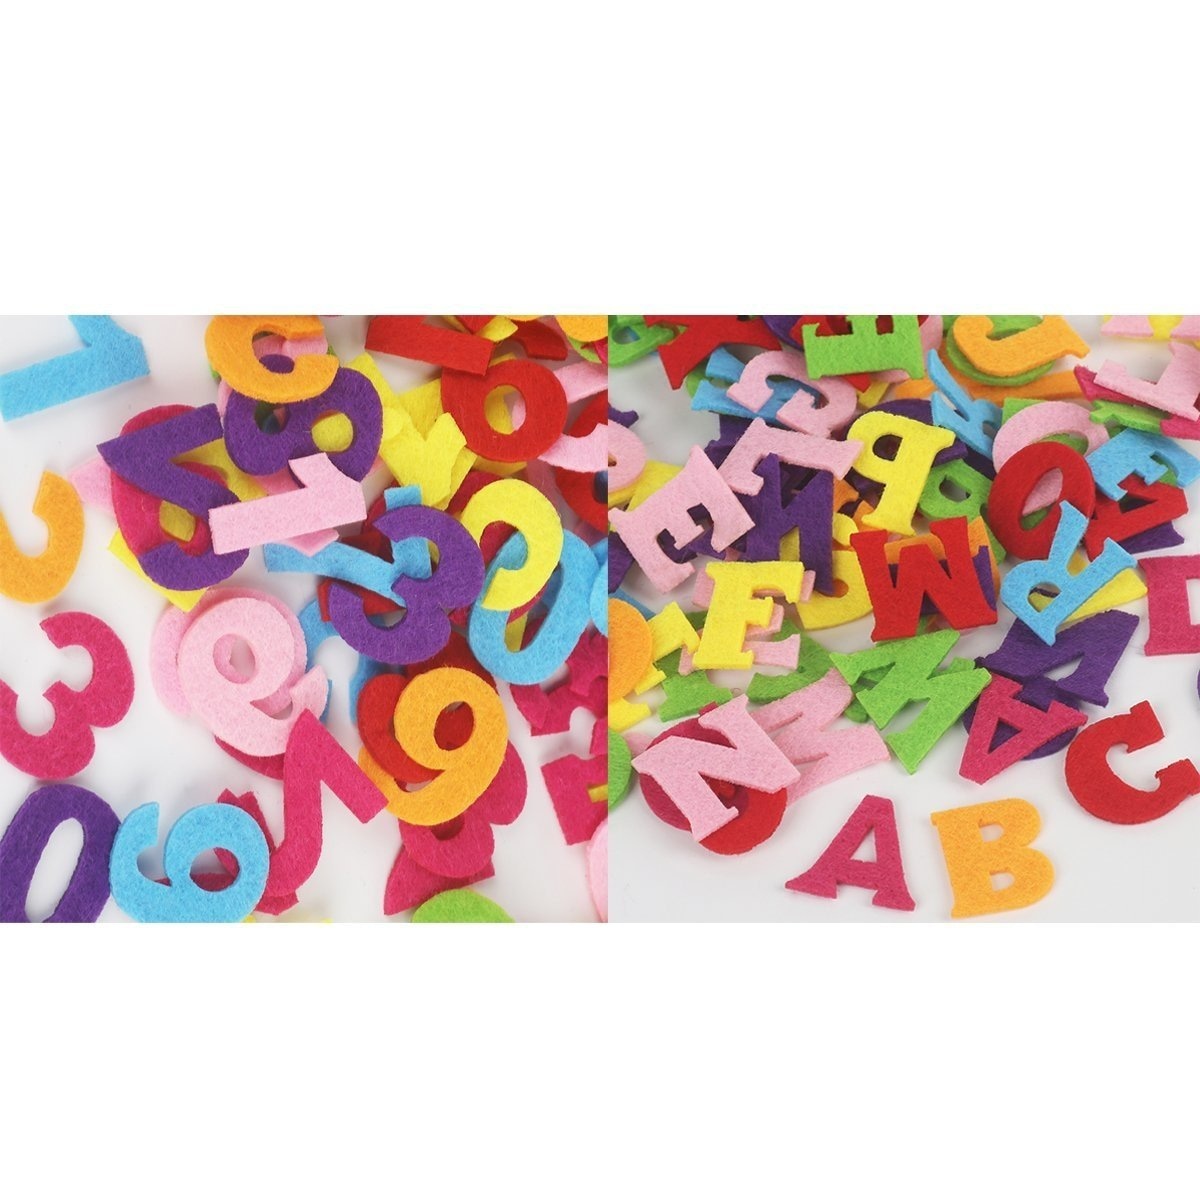 50pcs Fabric Felt Letters and and Numbers Alphabet Craft Cloth Patch For Sewing Dolls Scrapbook